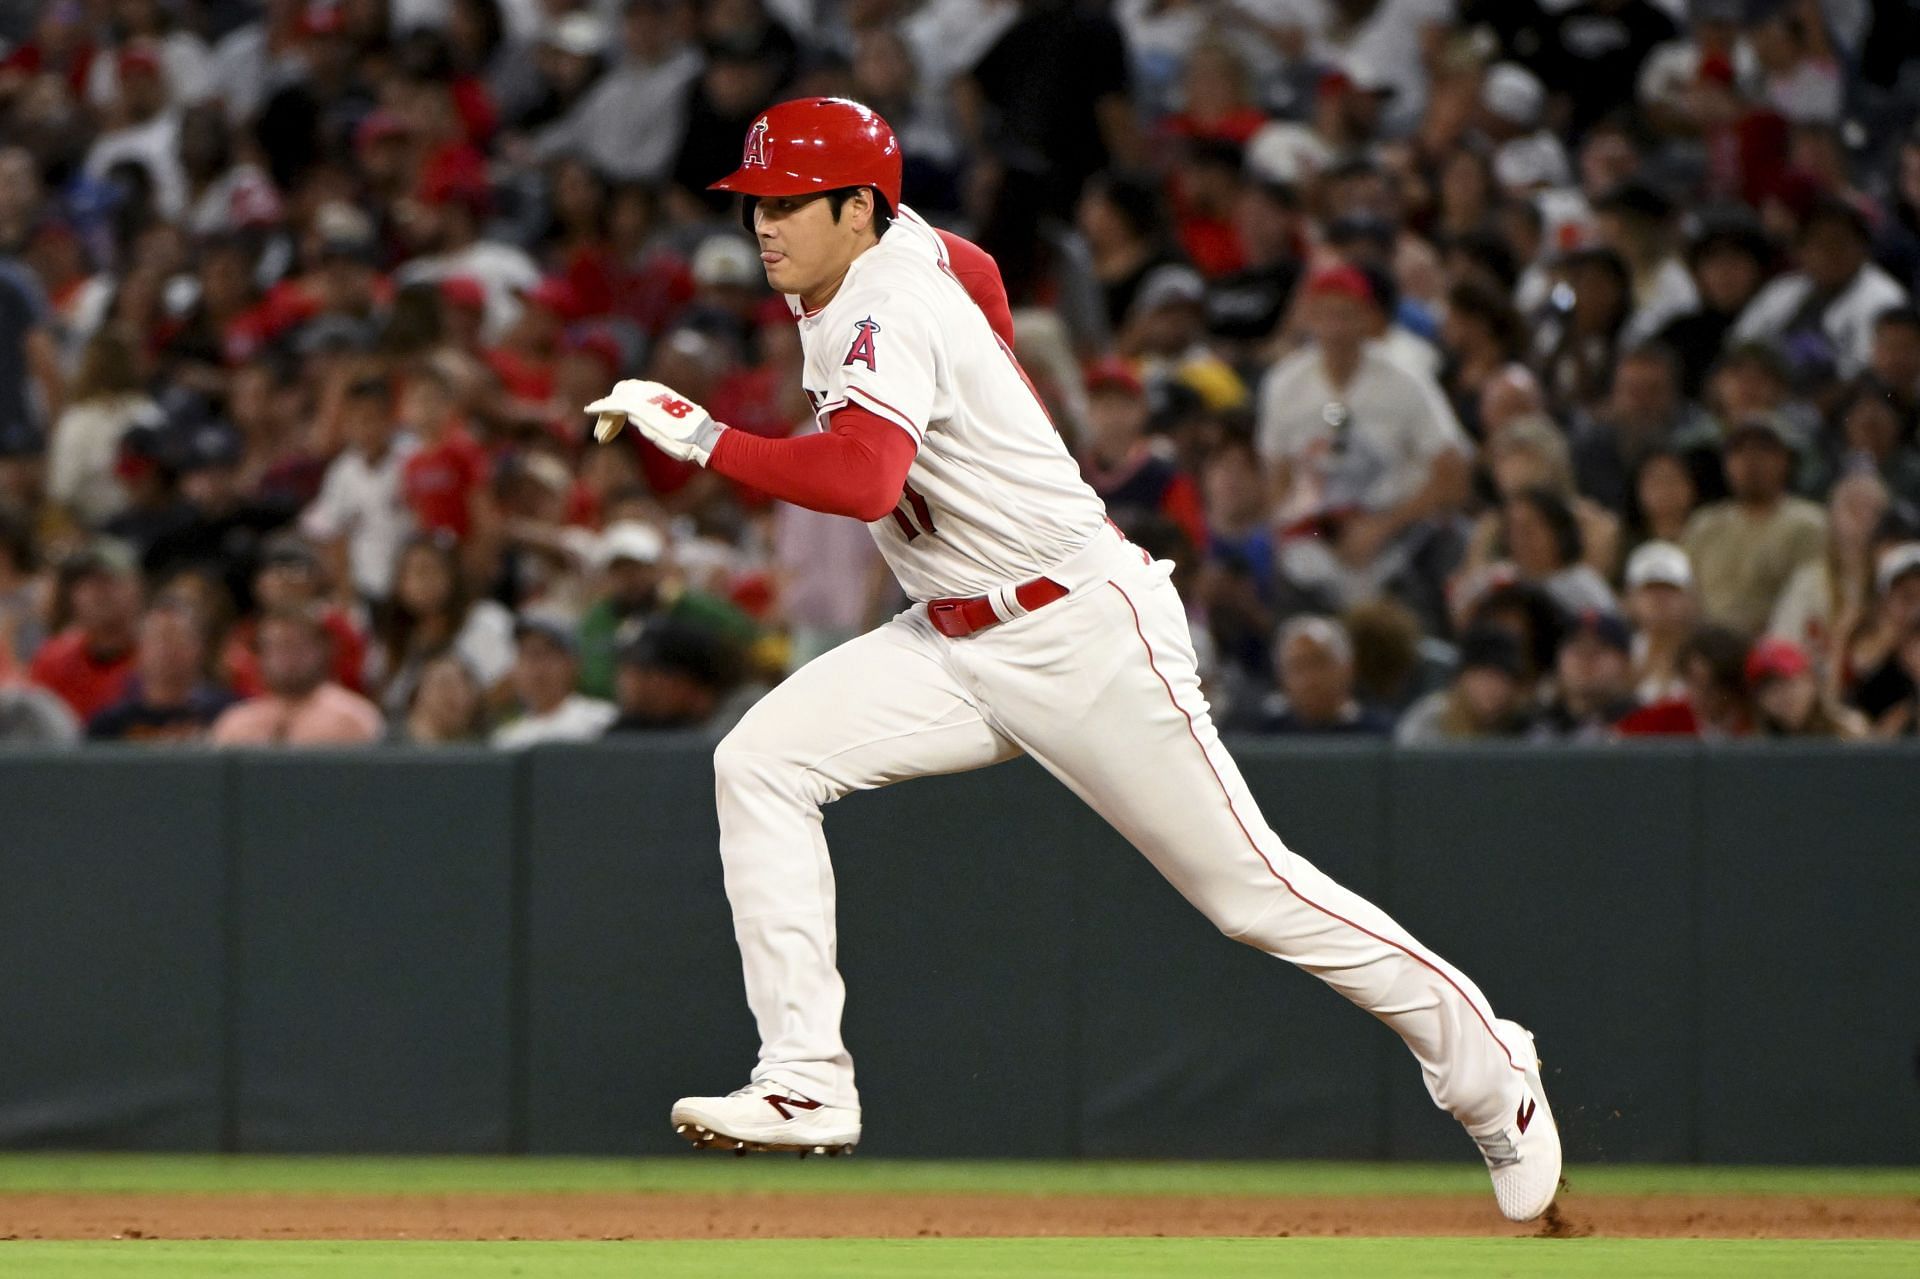 Shohei Ohtani is going to get paid